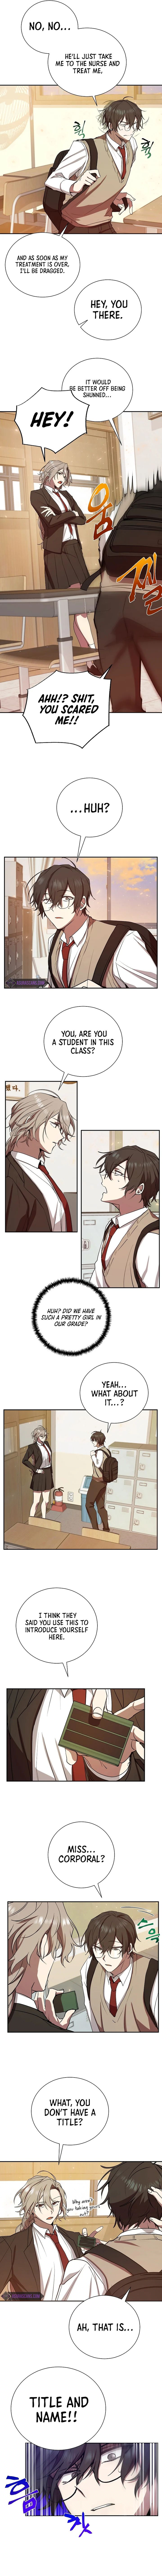 My School Life Pretending To Be a Worthless Person - Chapter 8 Page 3